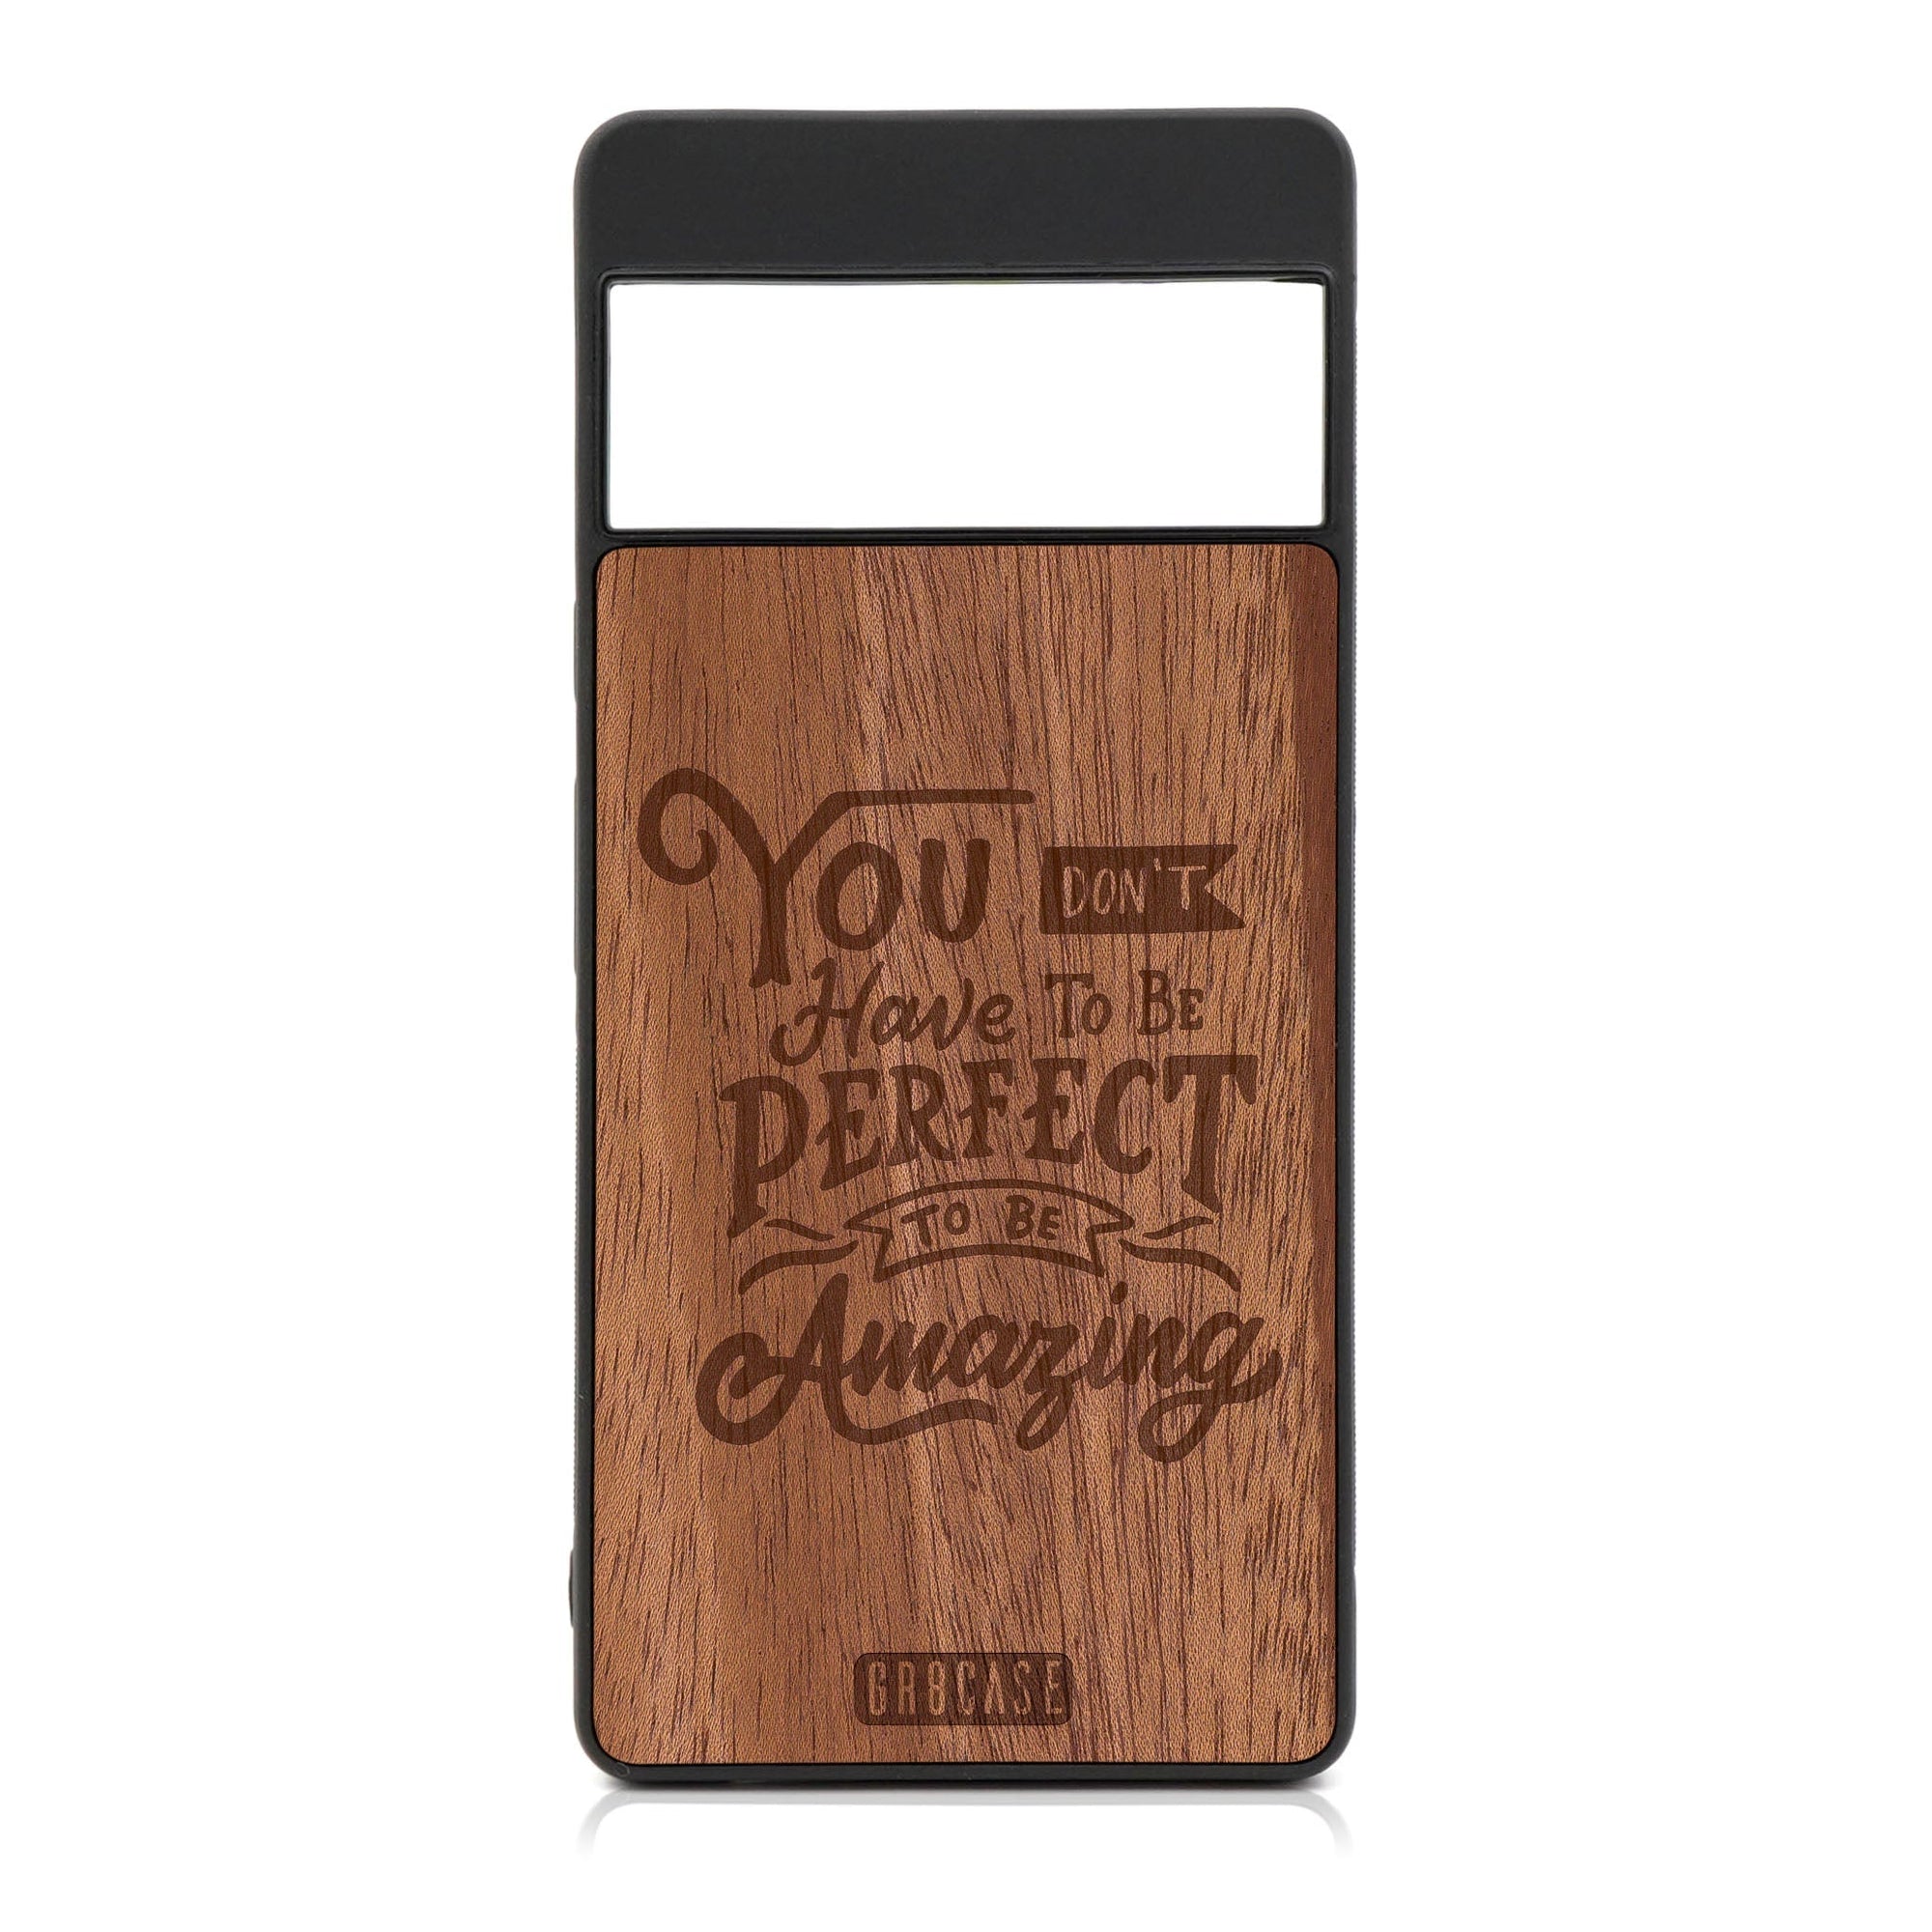 You Don't Have To Be Perfect To Be Amazing Design Wood Case For Google Pixel 7